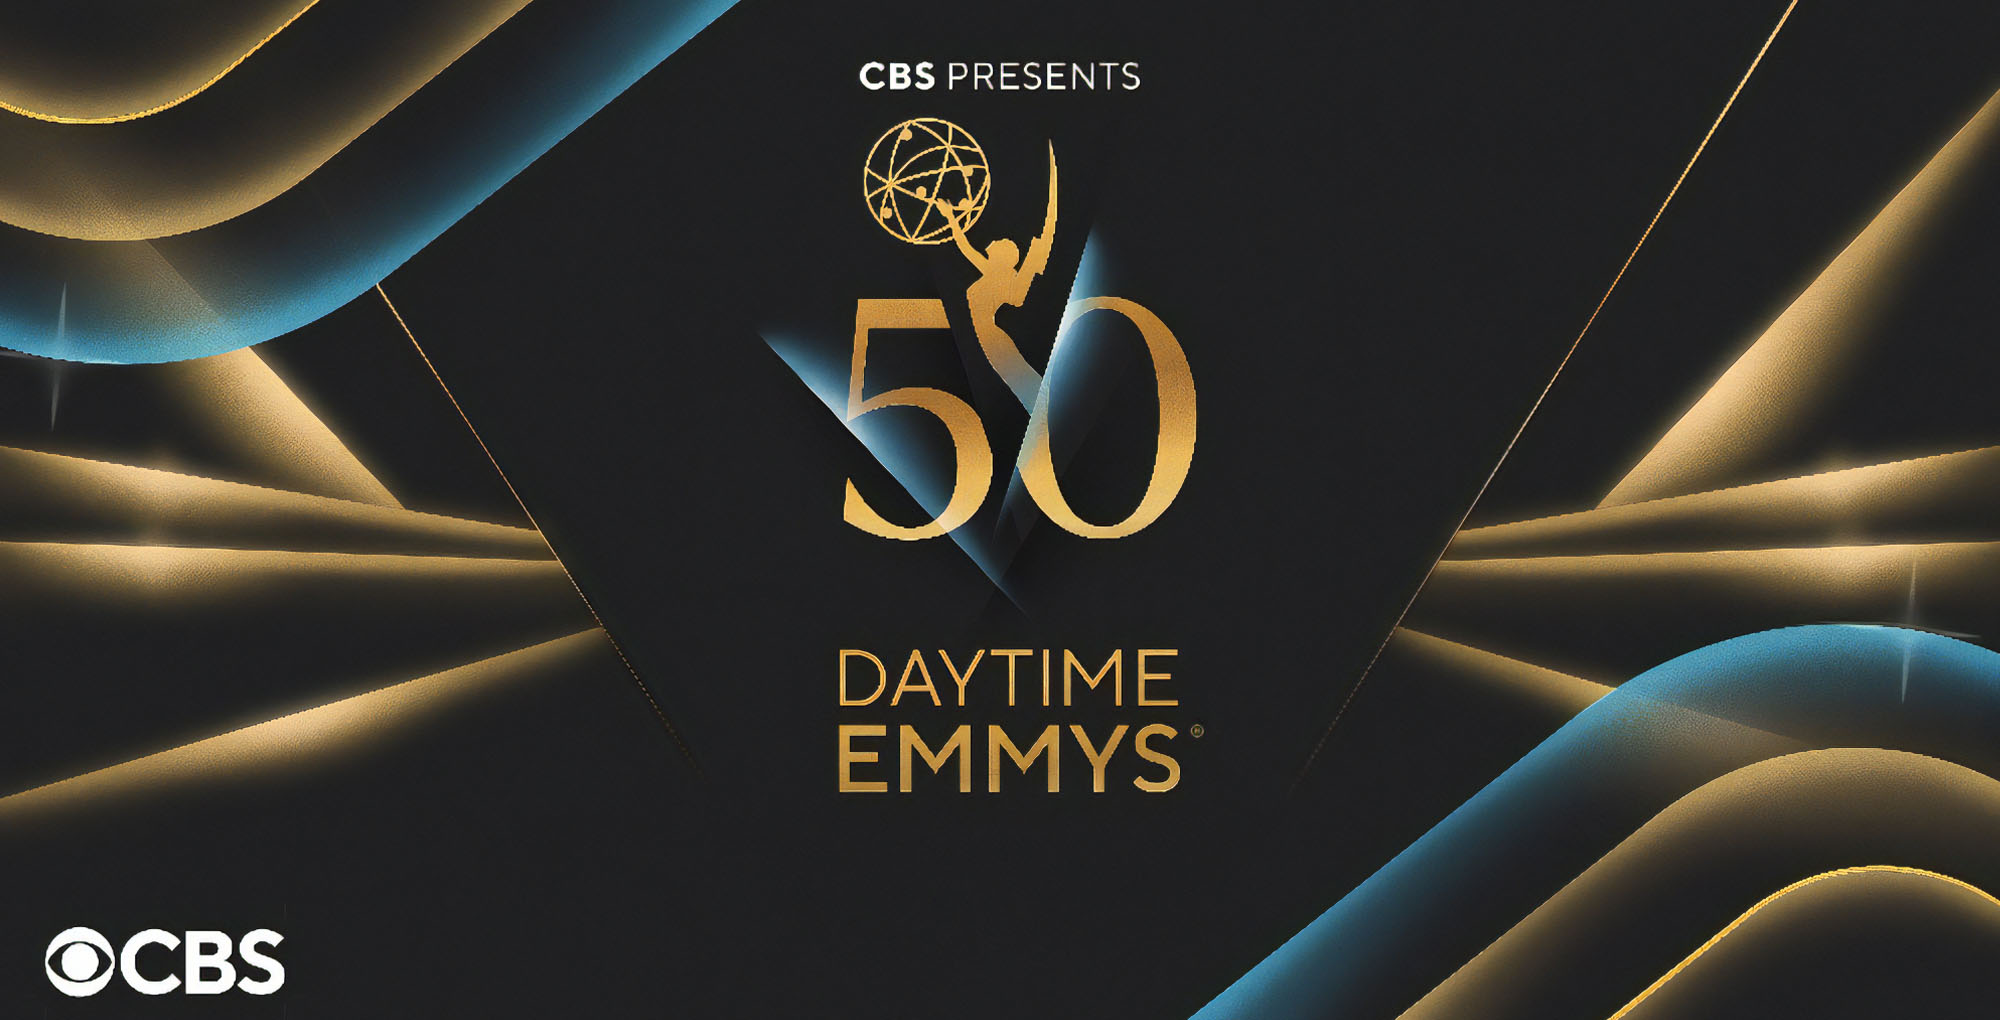 cbs to air daytime emmys in primetime.